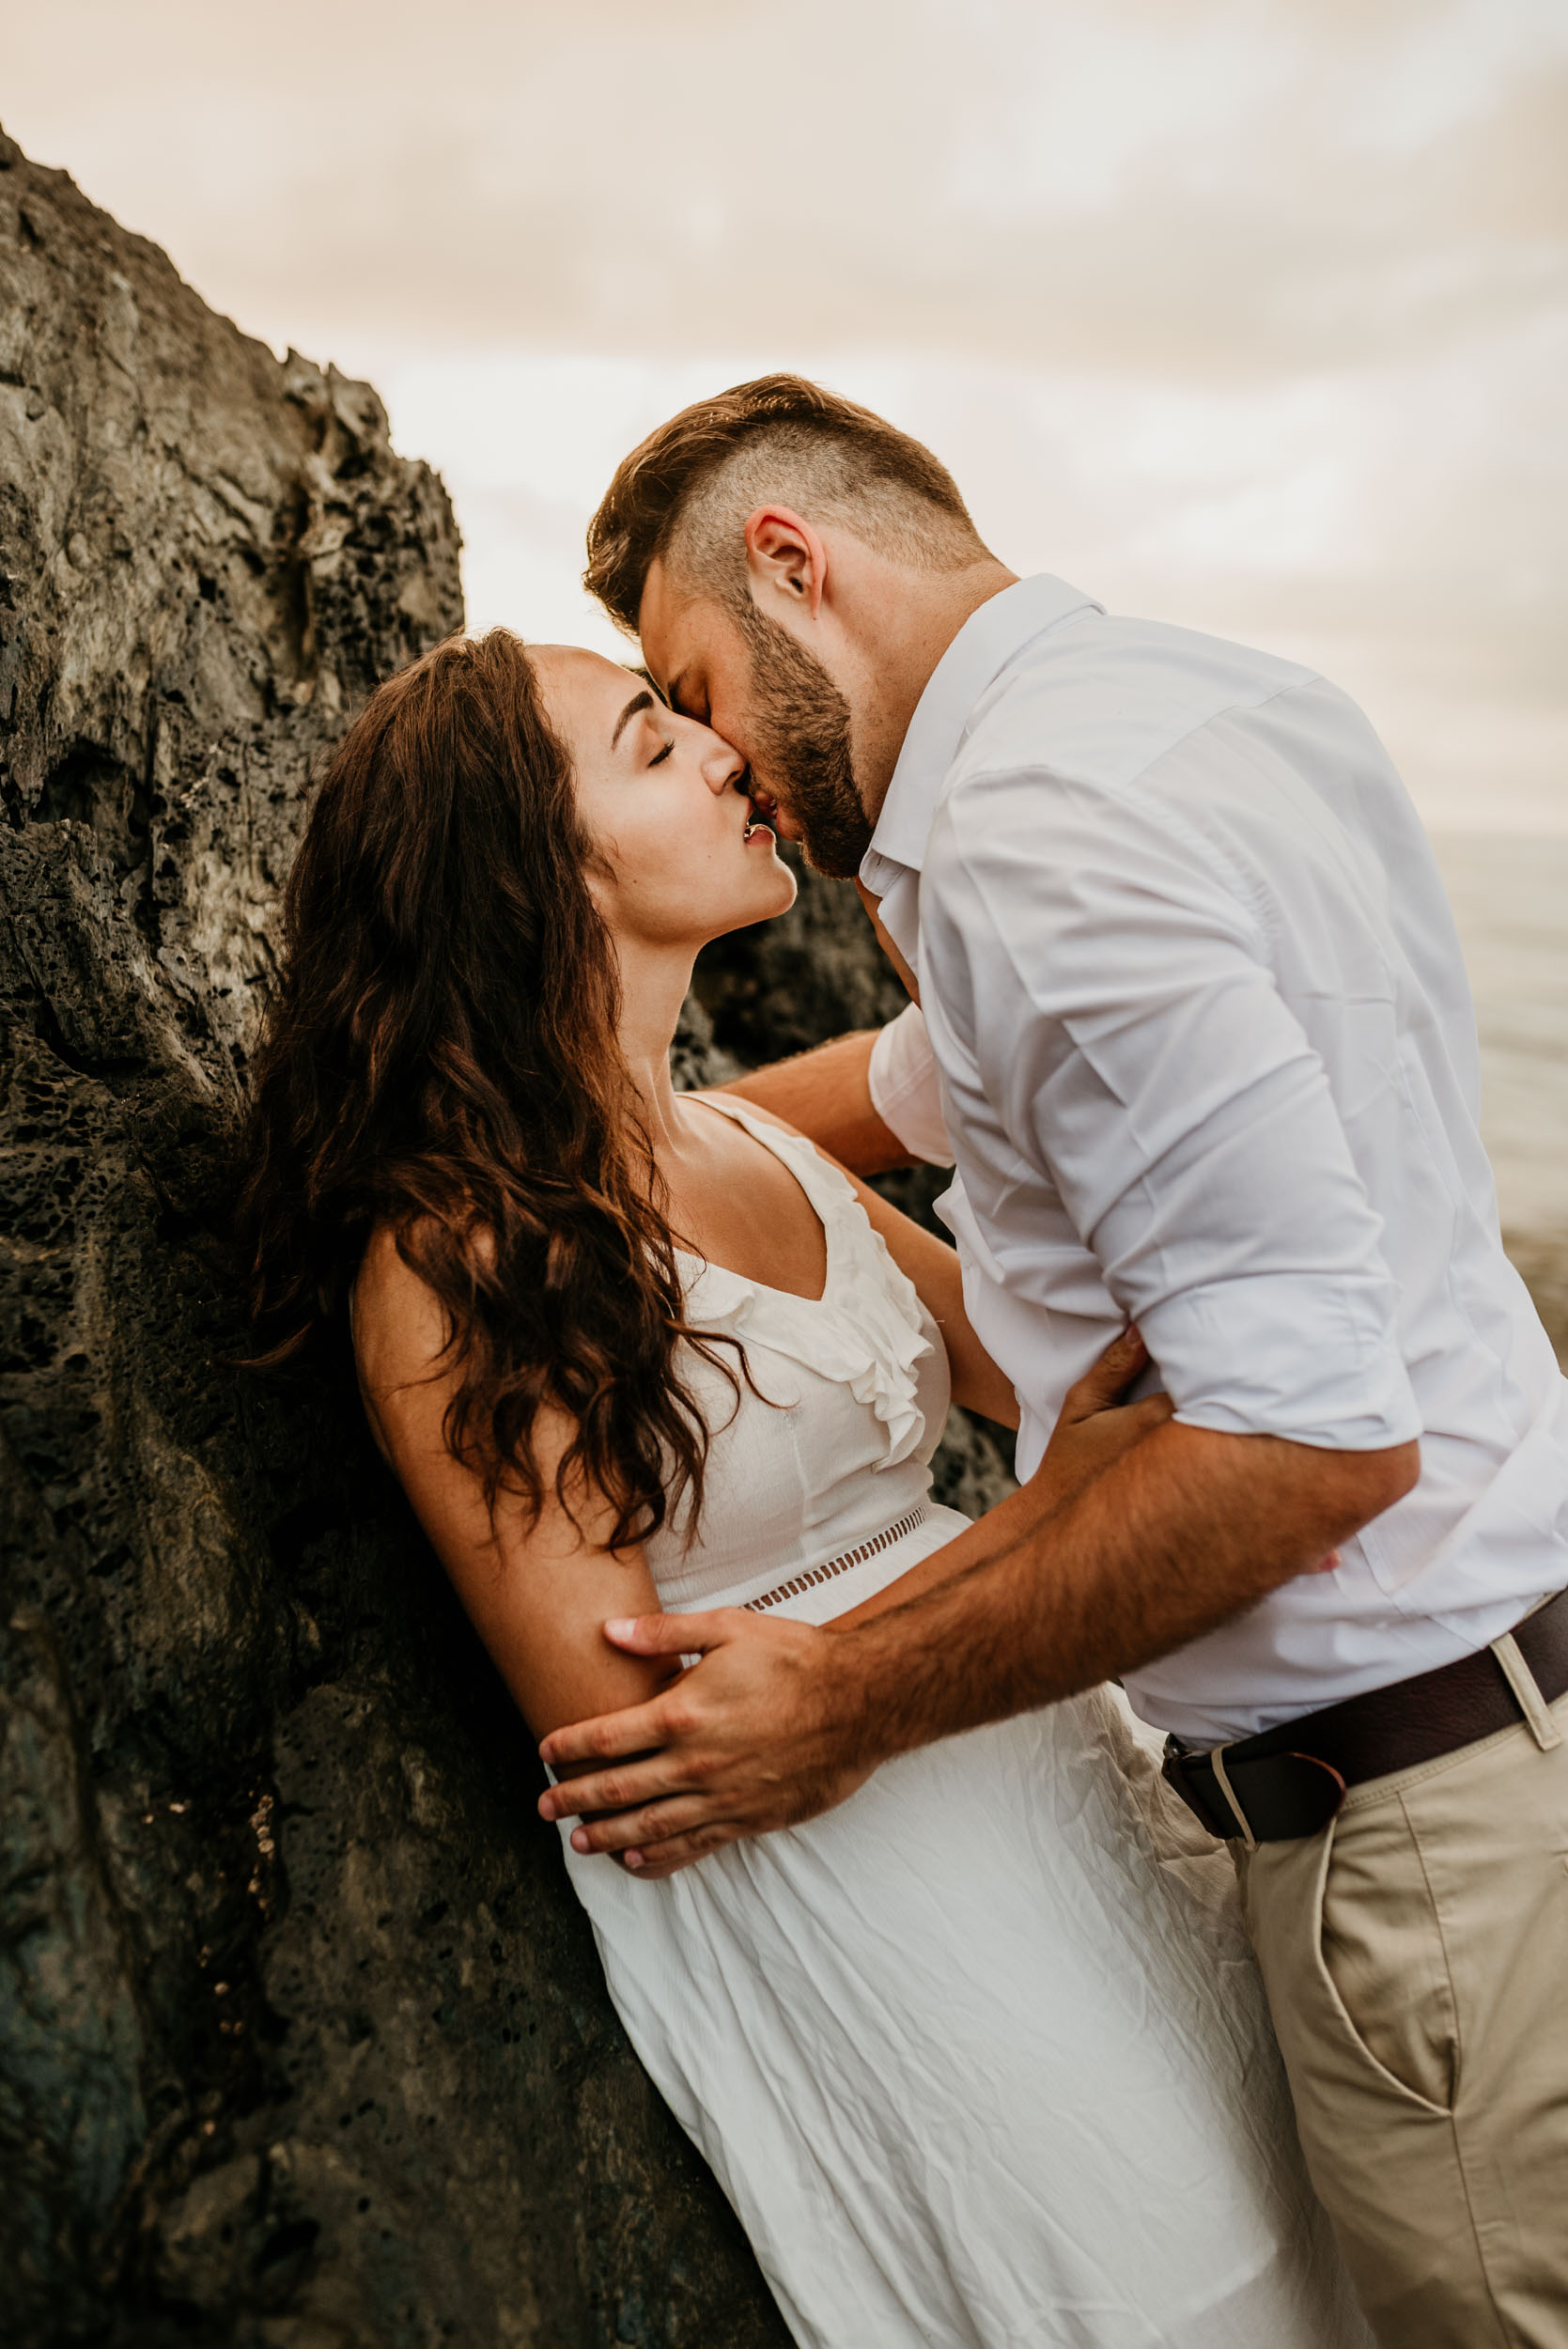 The Raw Photographer - Cairns Wedding Photographer - Engaged Engagement - Beach location - Candid Photography Queensland-30.jpg